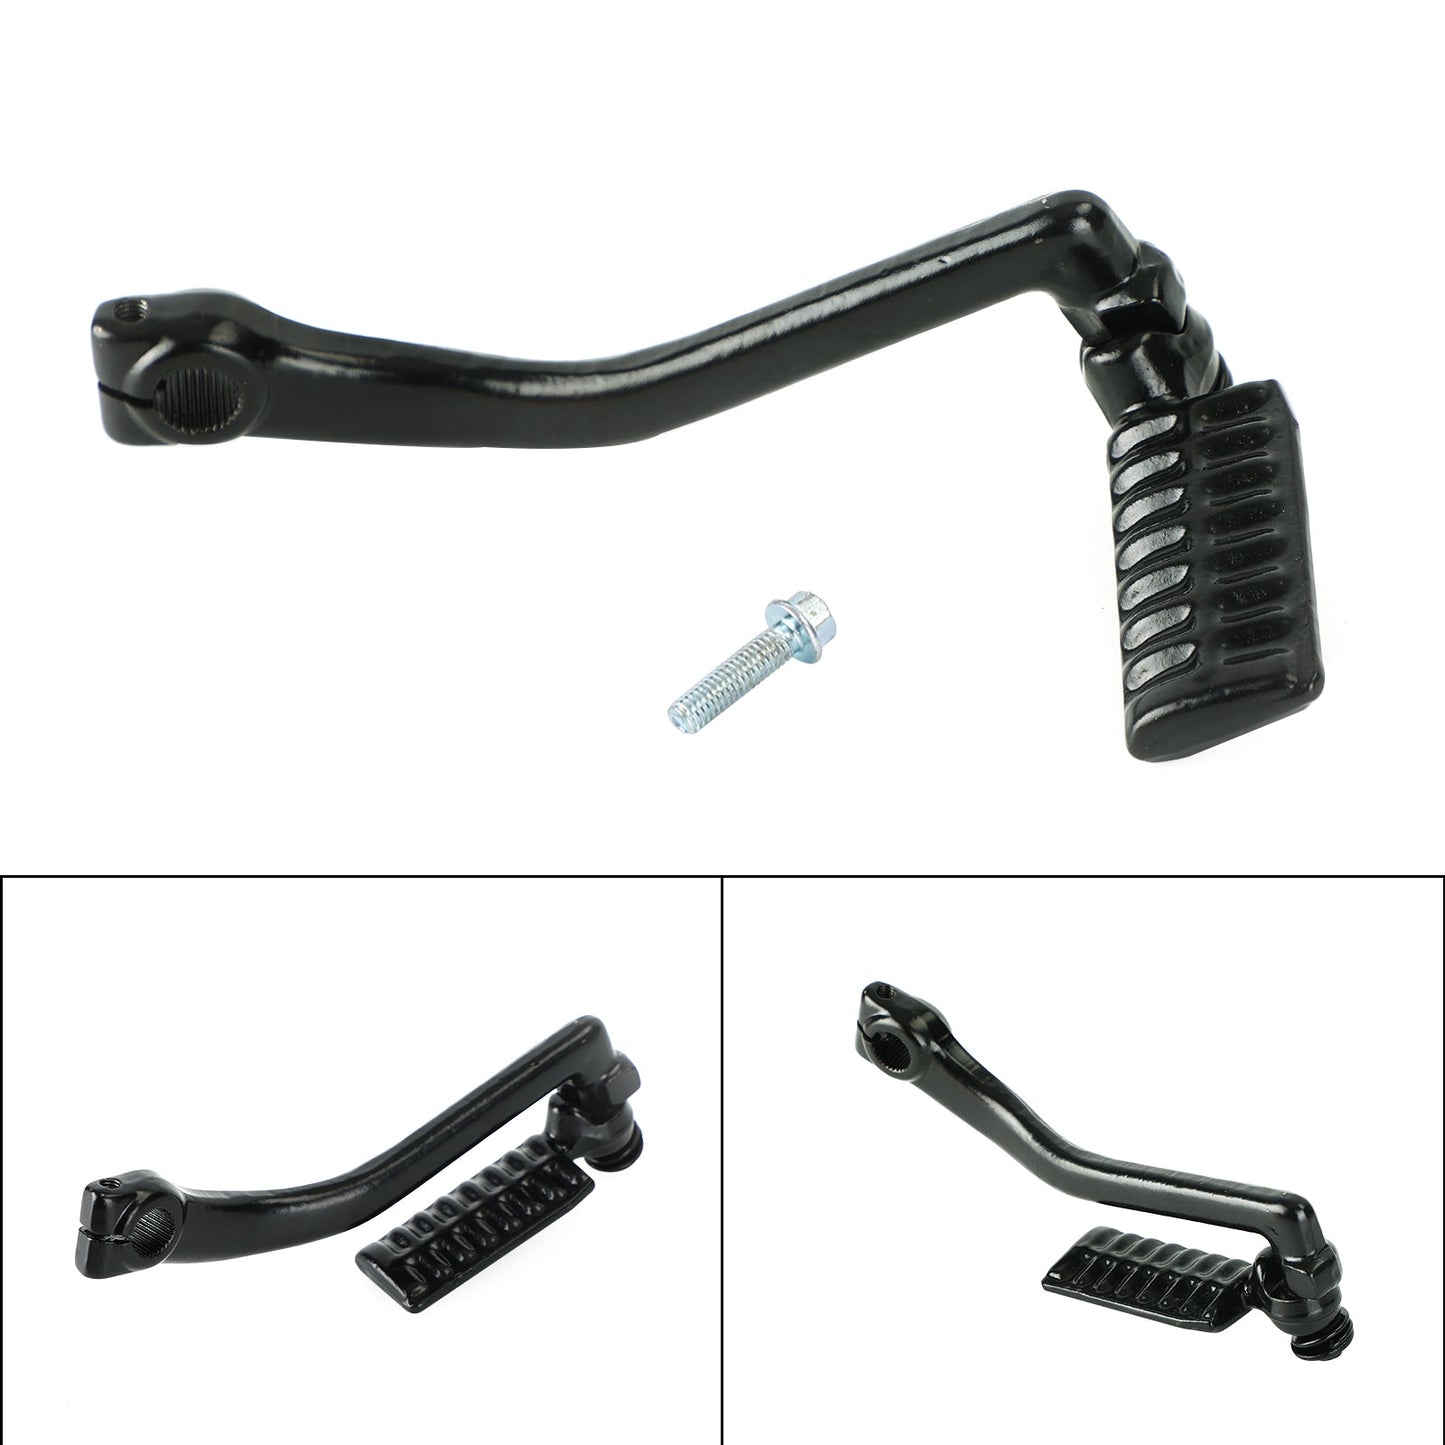 13Mm Diameter Kick Start Levers Black For Gy6-125 Gy6-150 Gy6-157 125Cc 150Cc